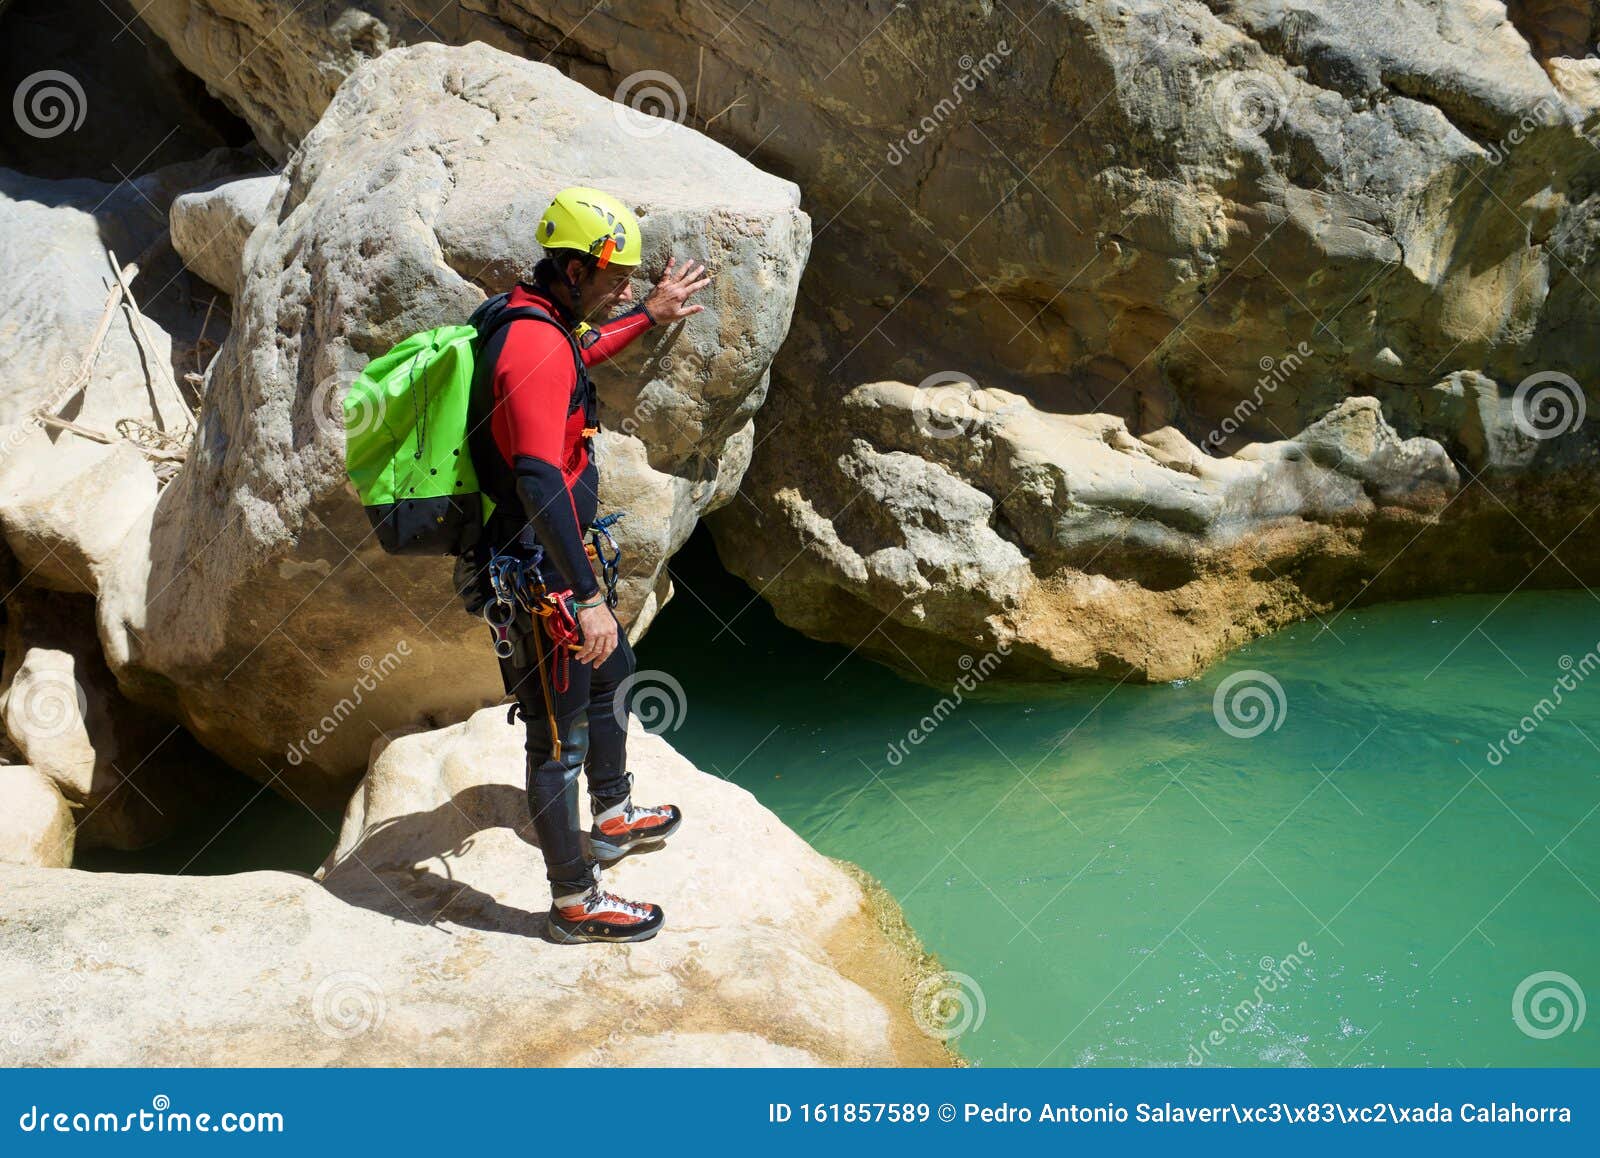 canyoning in spain